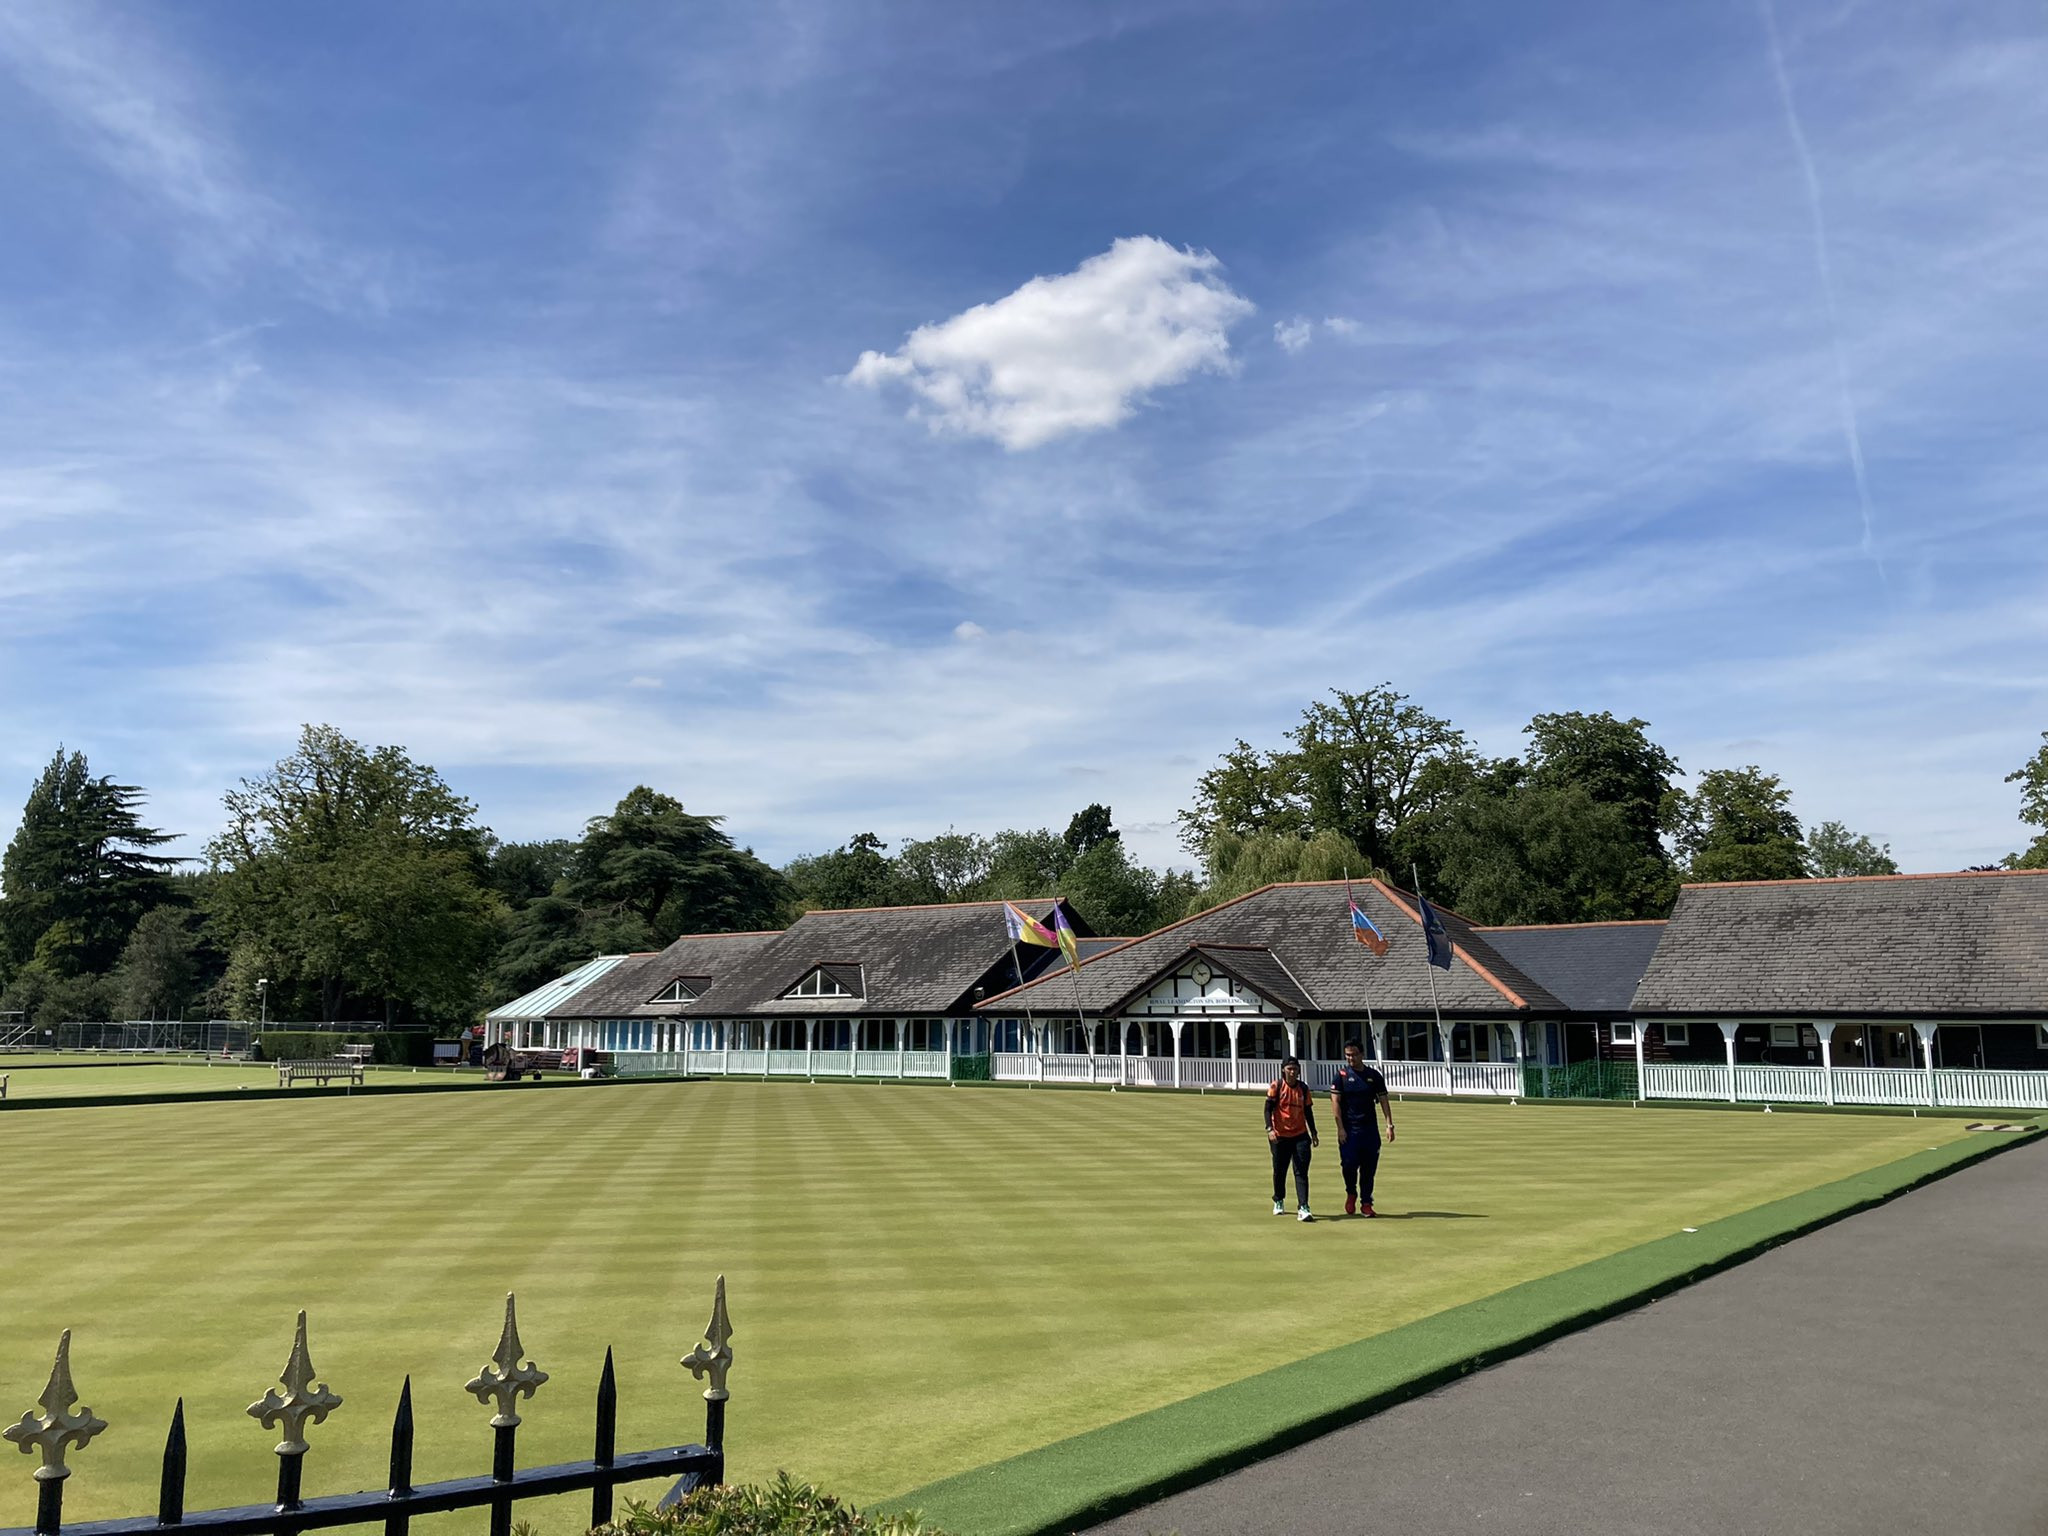 Lawn bowls and Para lawn bowls events at Birmingham 2022 are due to run from July 29 until August 6 at Victoria Park in Leamington Spa ©ITG